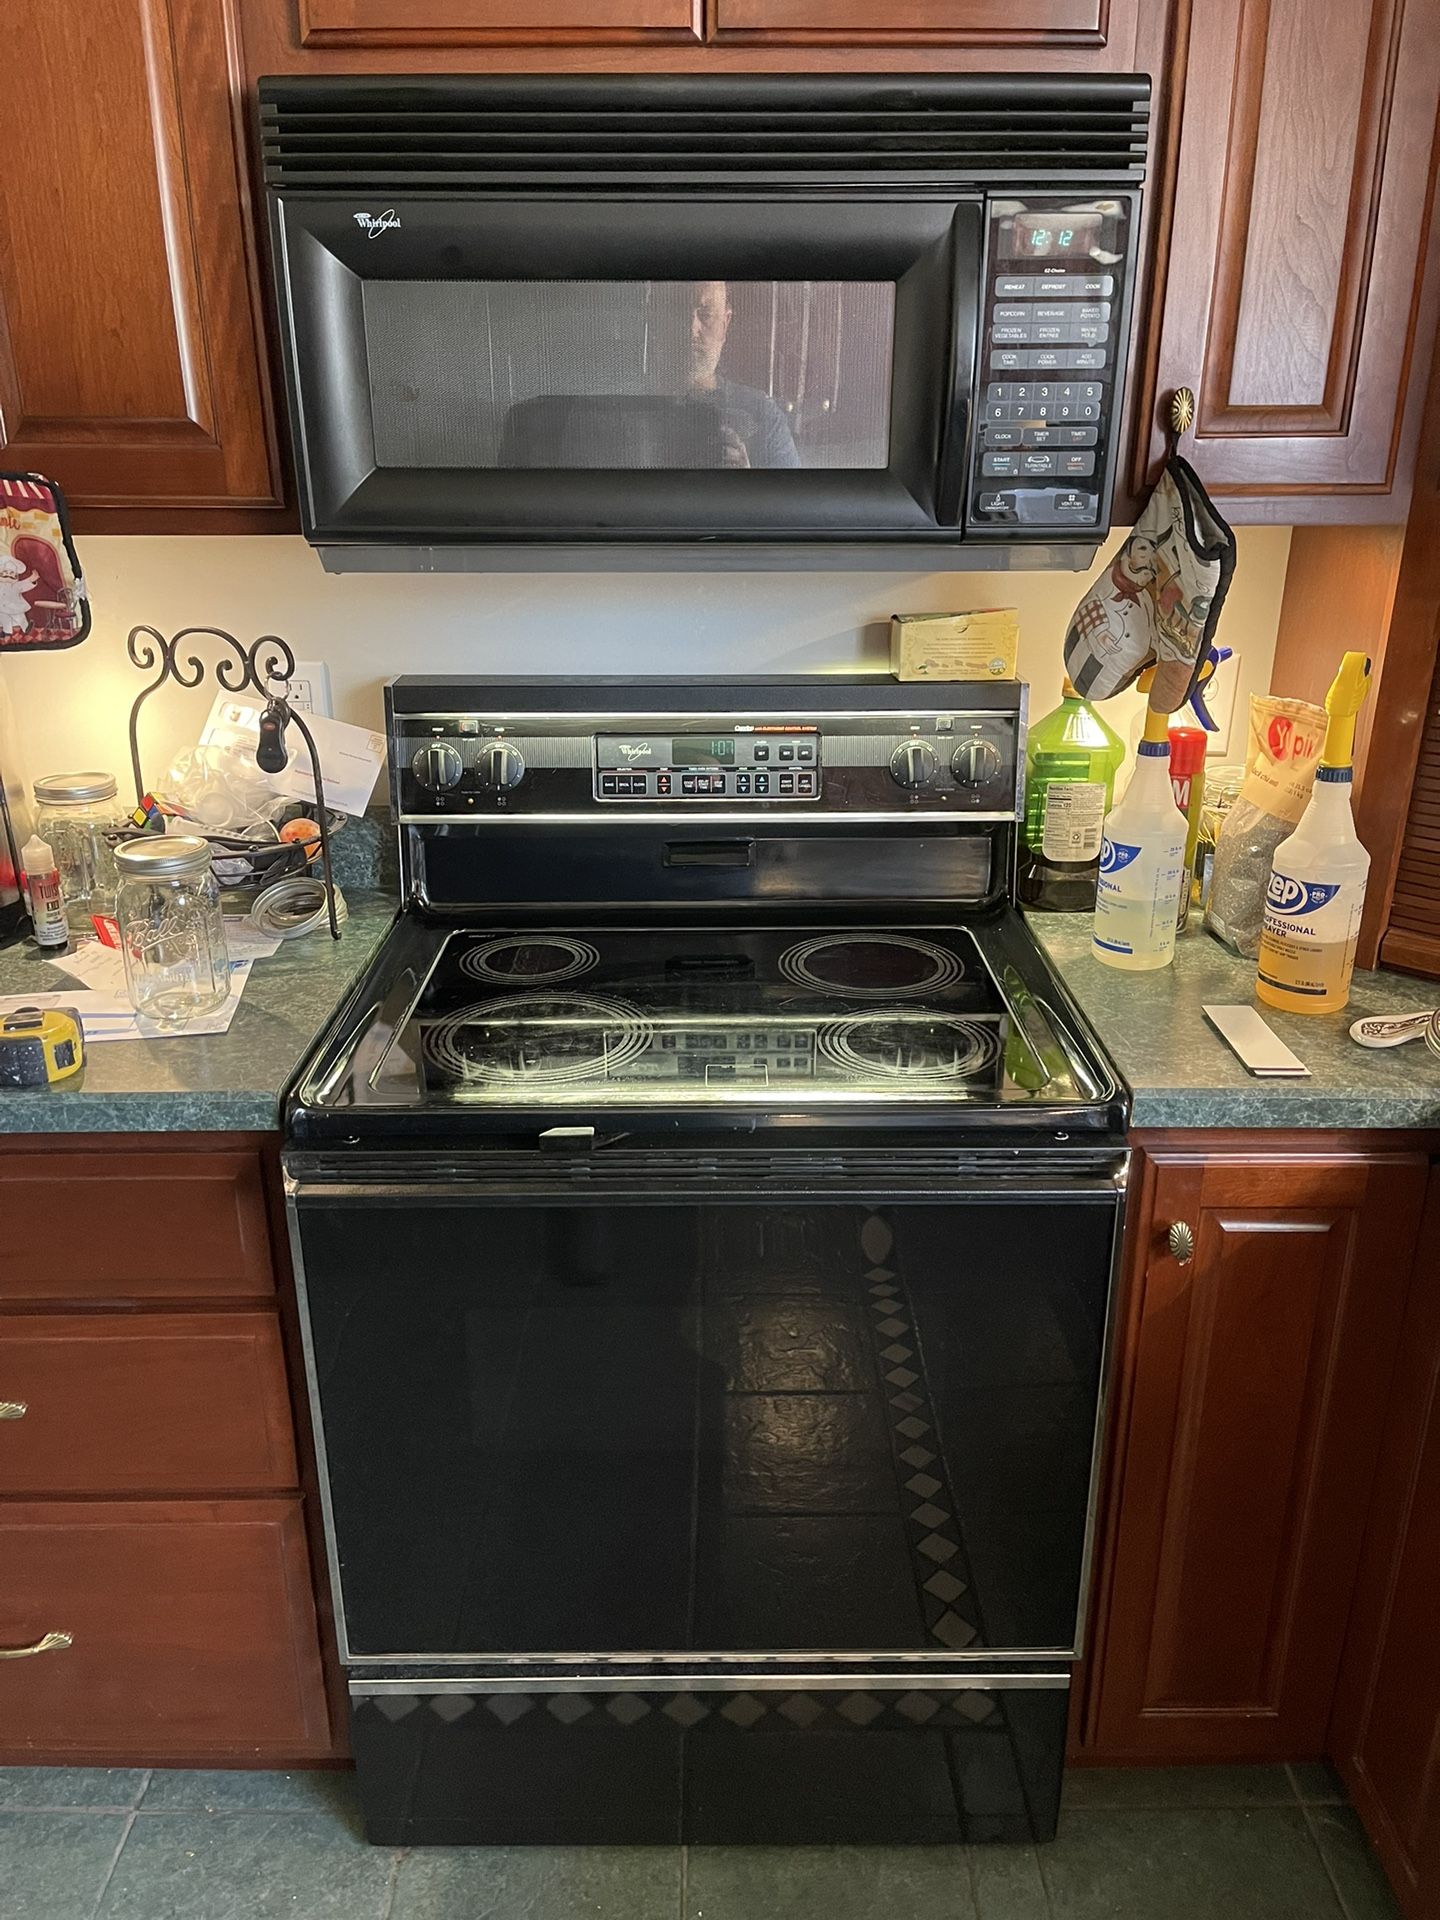 Electric Range And Microwave 